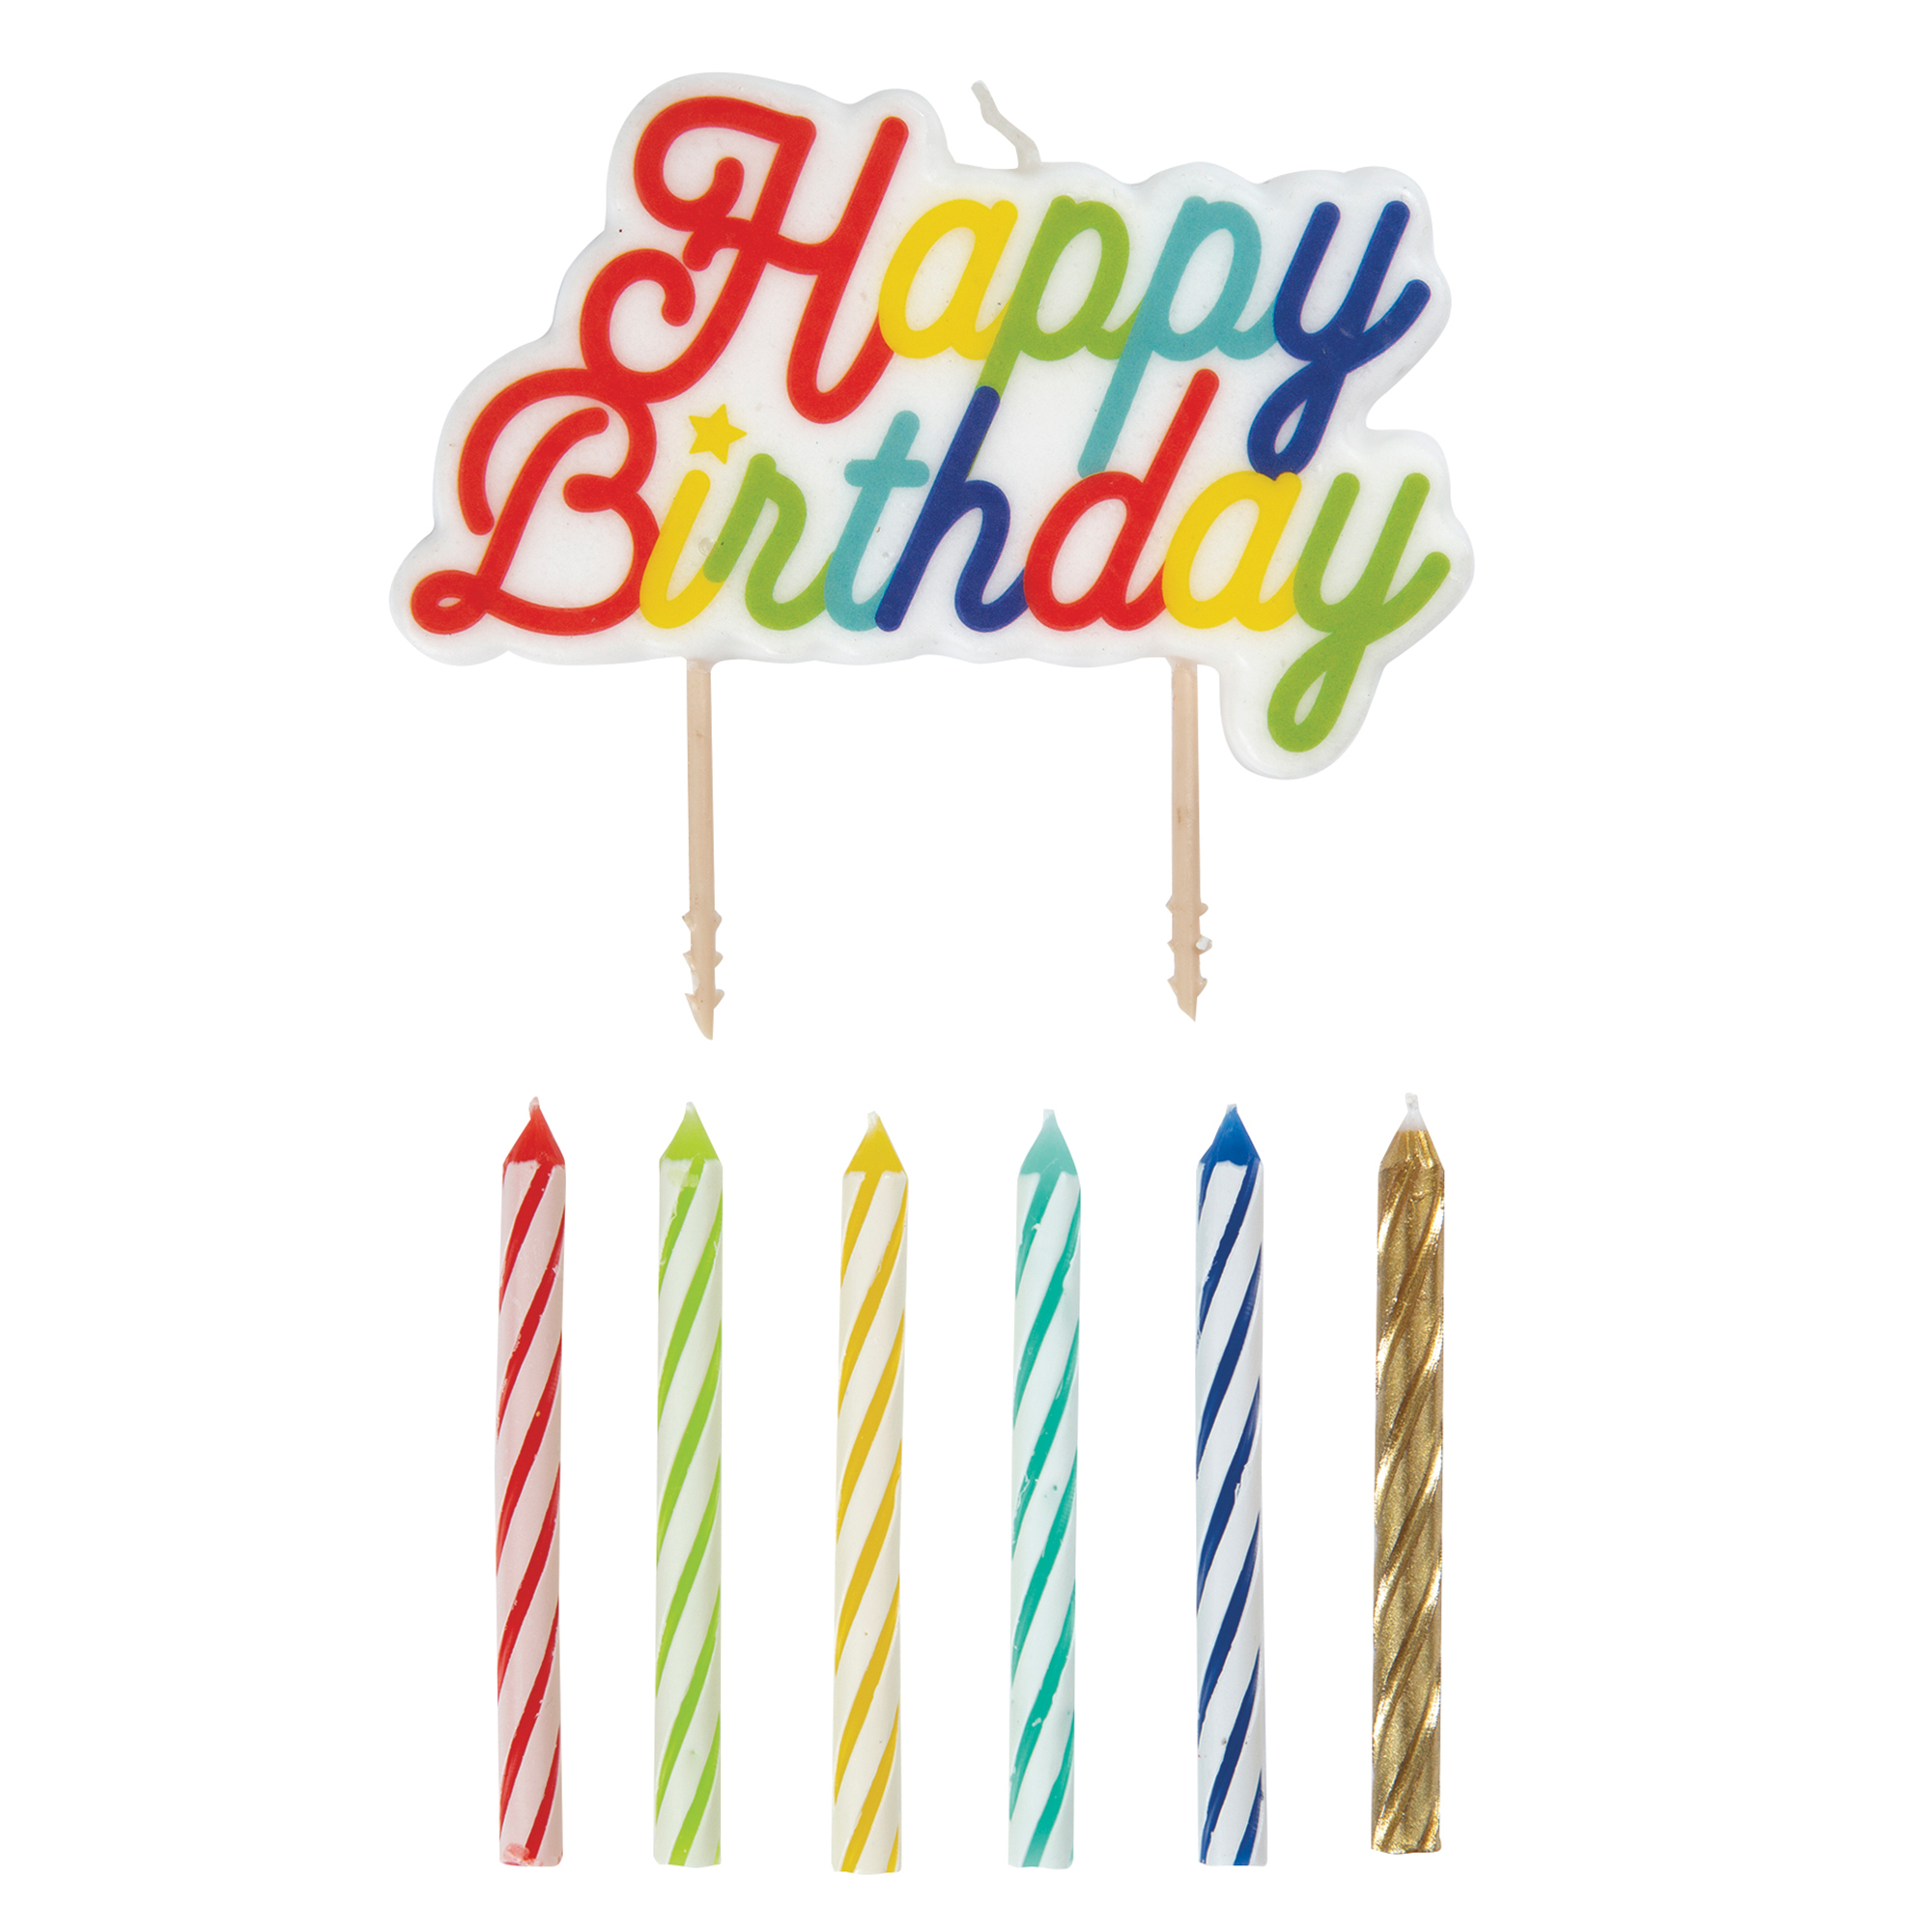 12 Multicoloured Cake Candles & Large Happy Birthday"" Candle Pack